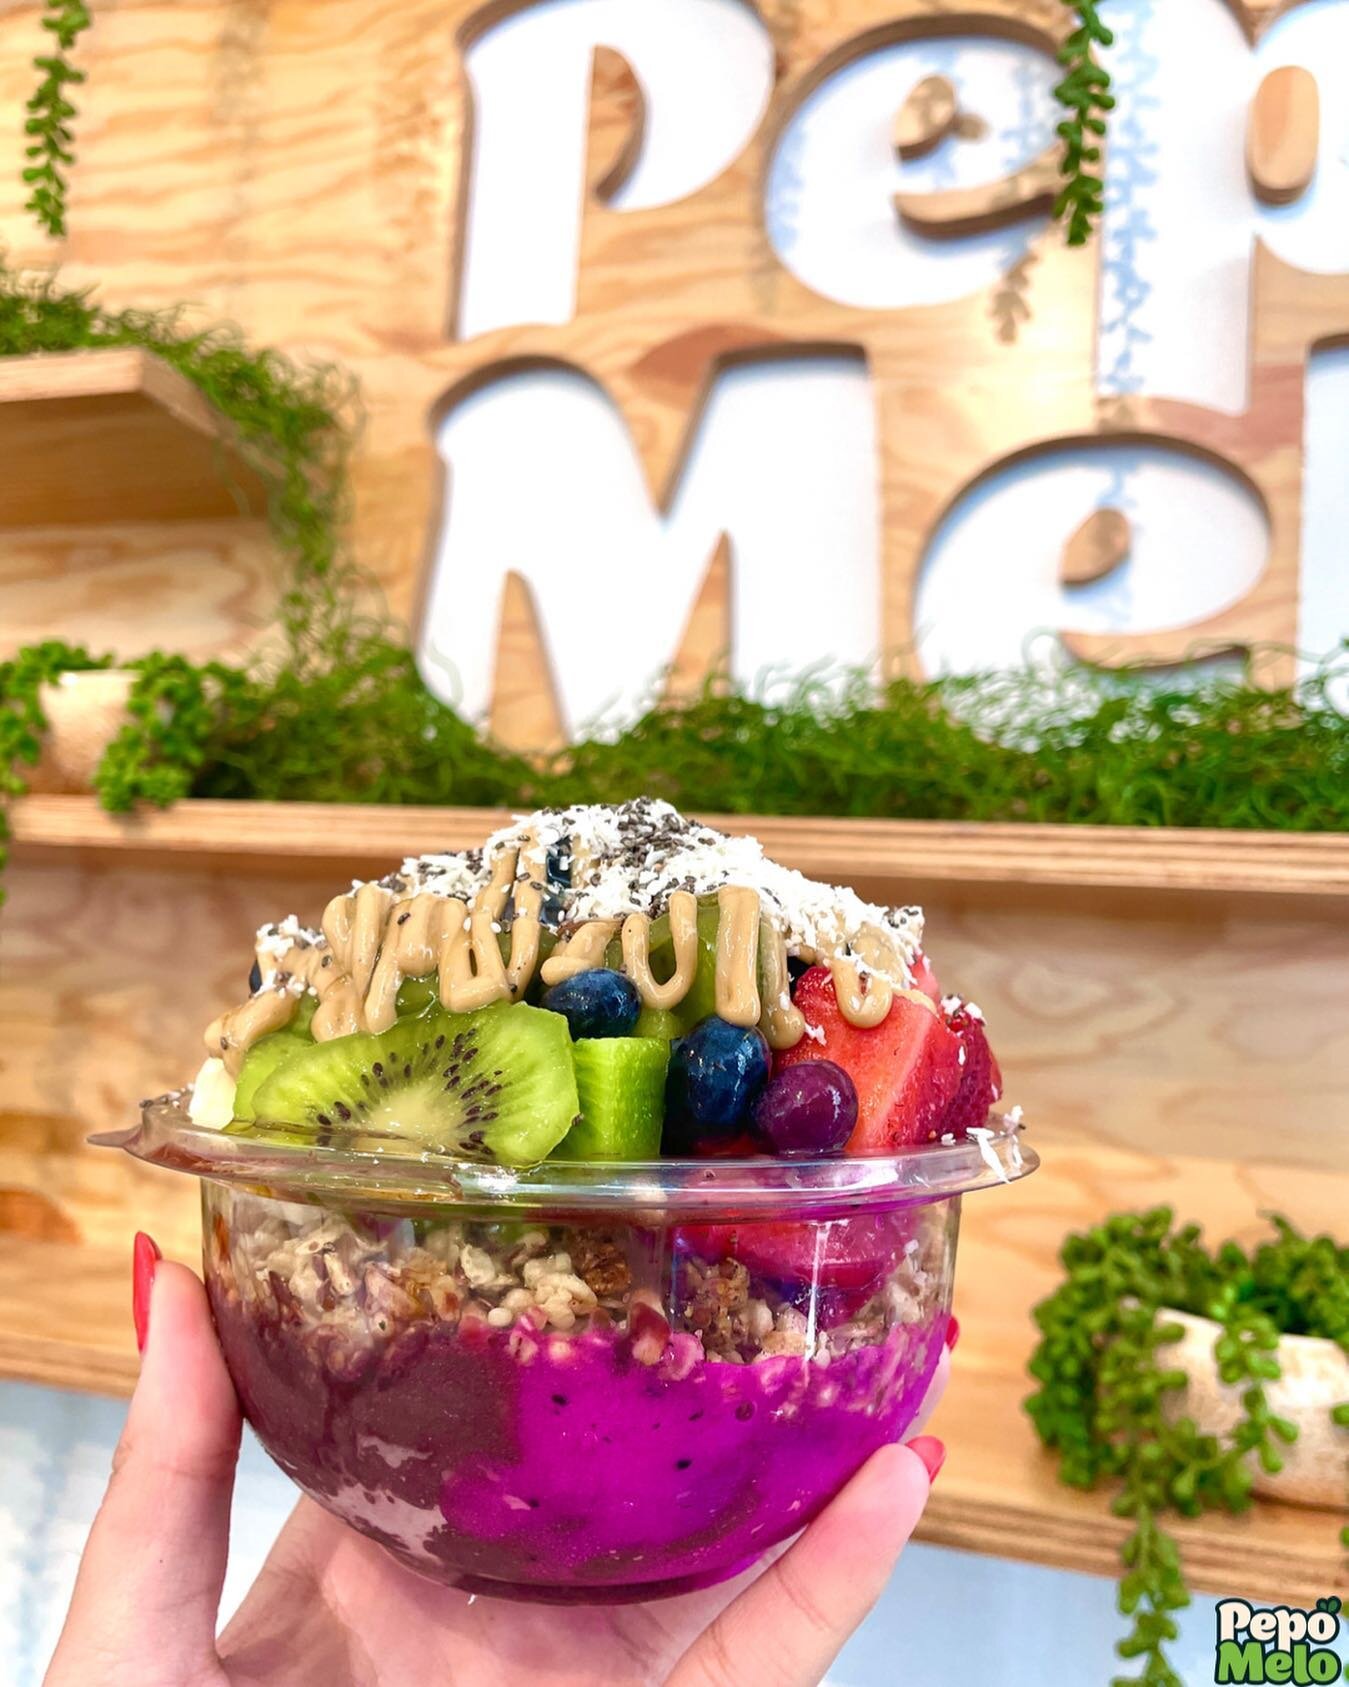 If you haven&rsquo;t taken advantage of our half off bowls on weekday mornings promo yet, what are you waiting for?! See our 4/18 post for the deets 😌
🍓
Tag us in your posts and stories for a chance to be featured!📱
🥝
Upland store: 659 W. Foothil